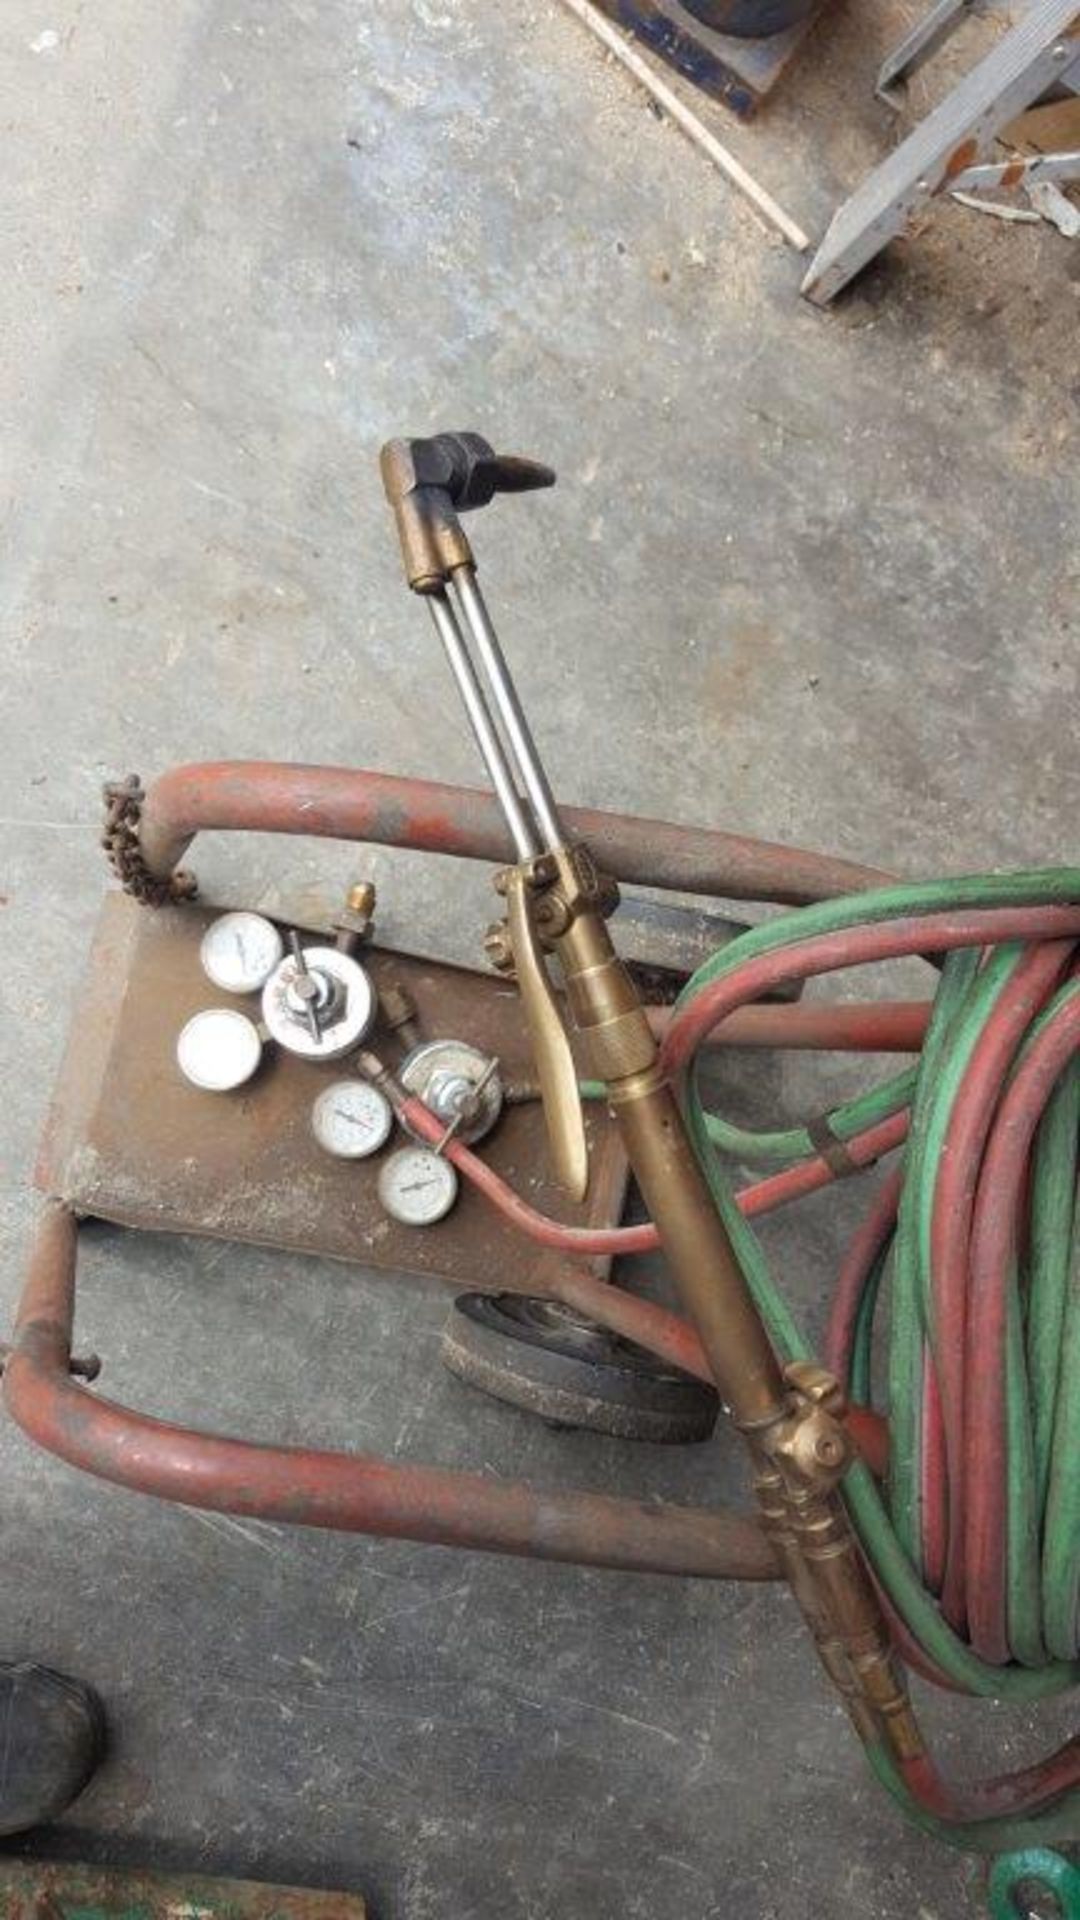 Oxy acetylene torch kit with cart - Image 2 of 2